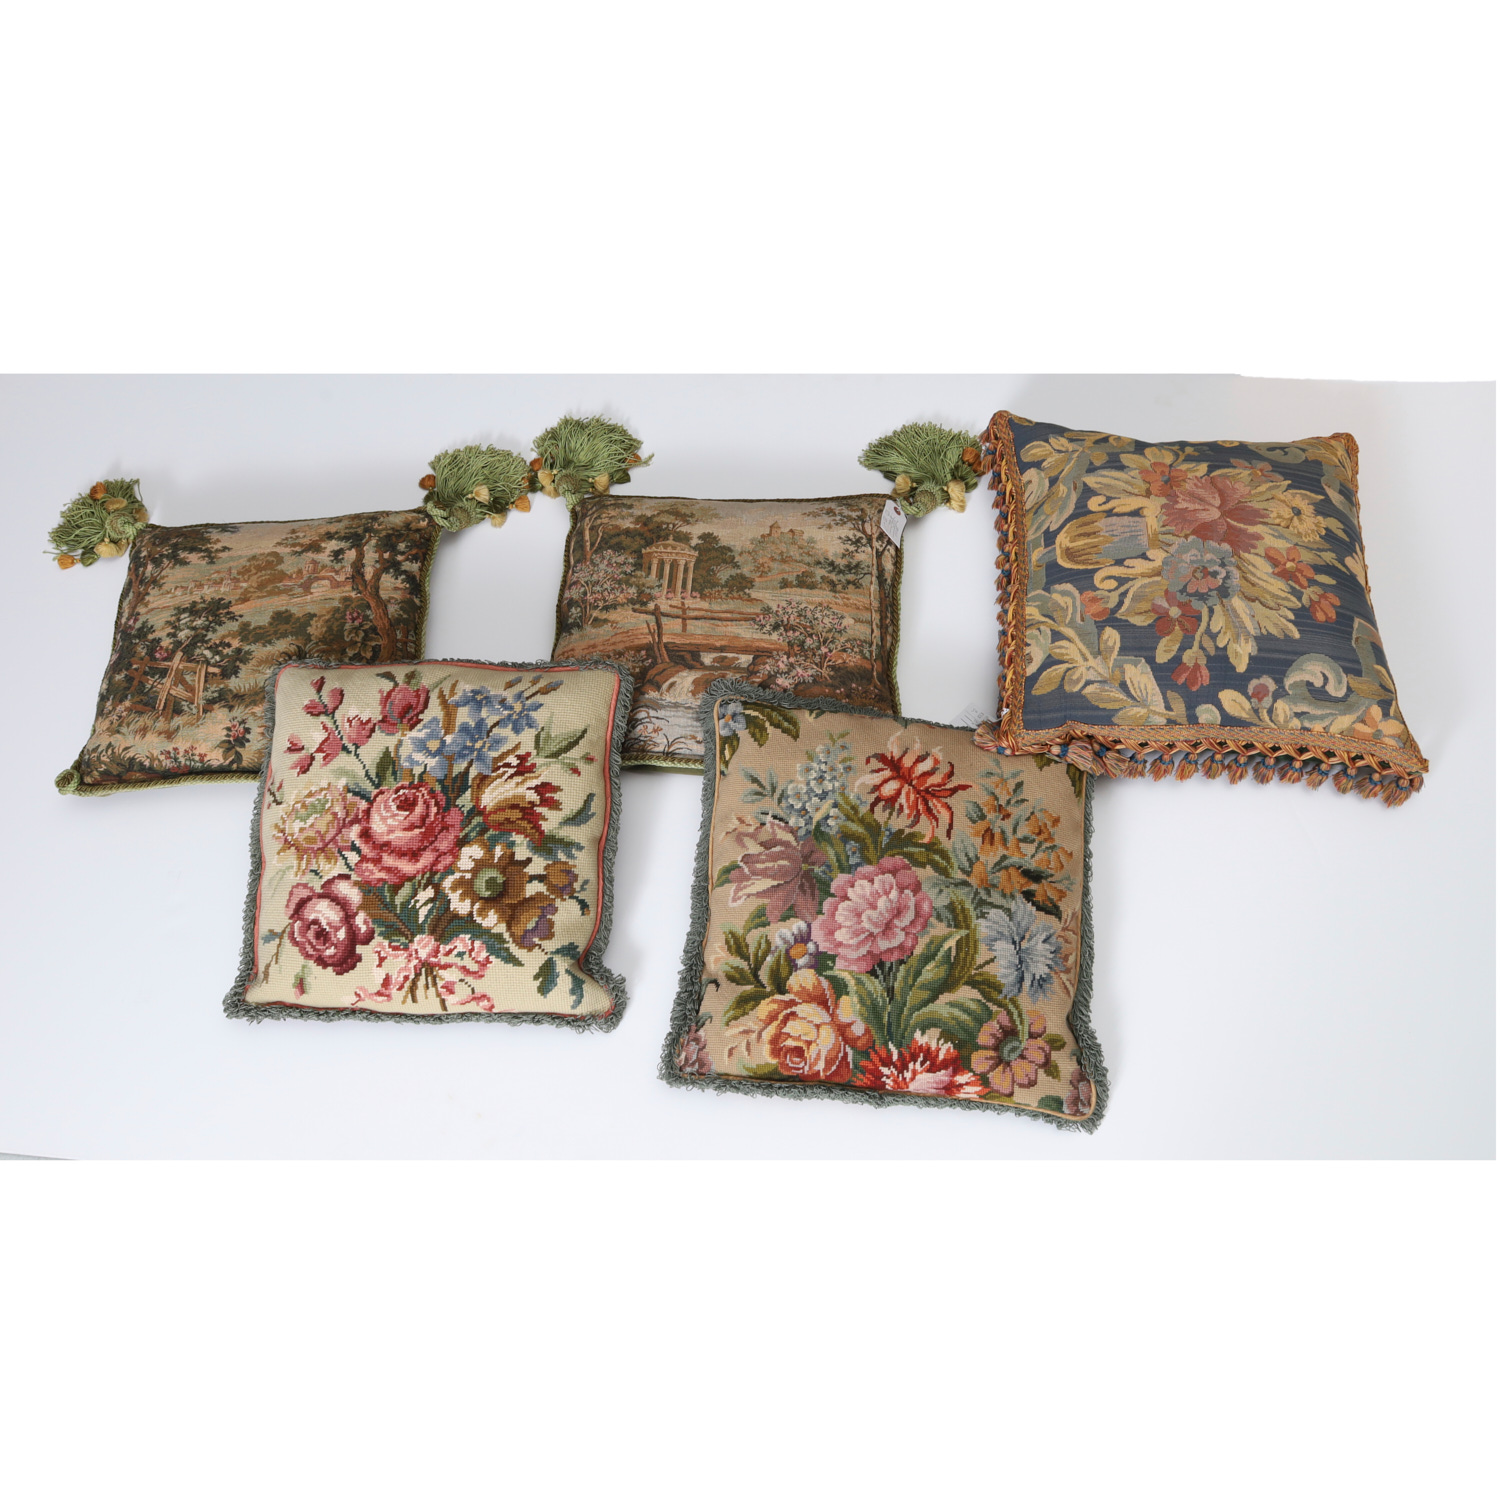 NICE GROUP TAPESTRY AND NEEDLEPOINT 361720